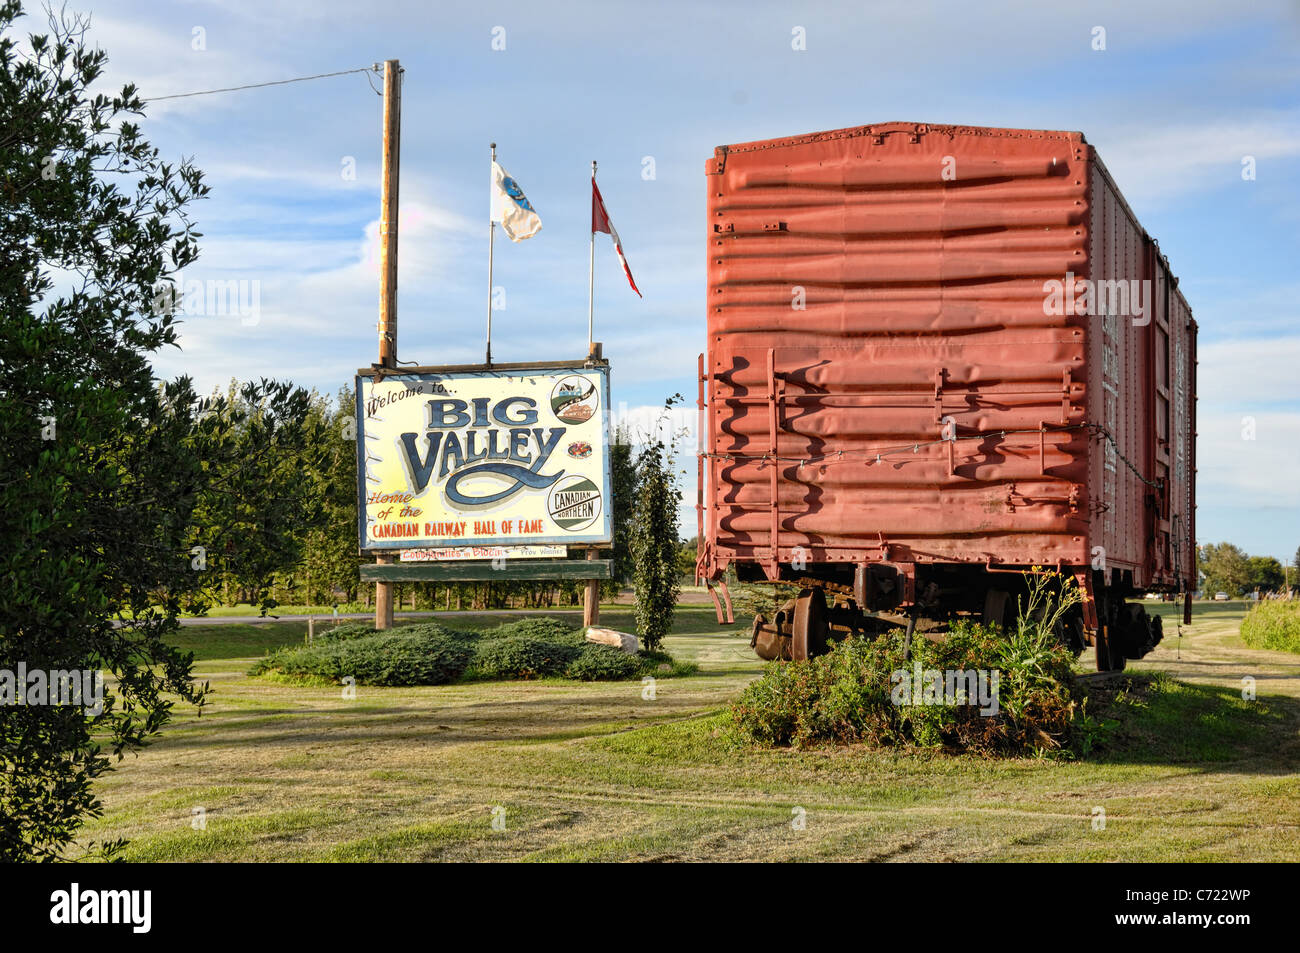 A welcome sign and train boxcar at the entrance to Big Valley, Alberta, Canada. Stock Photo